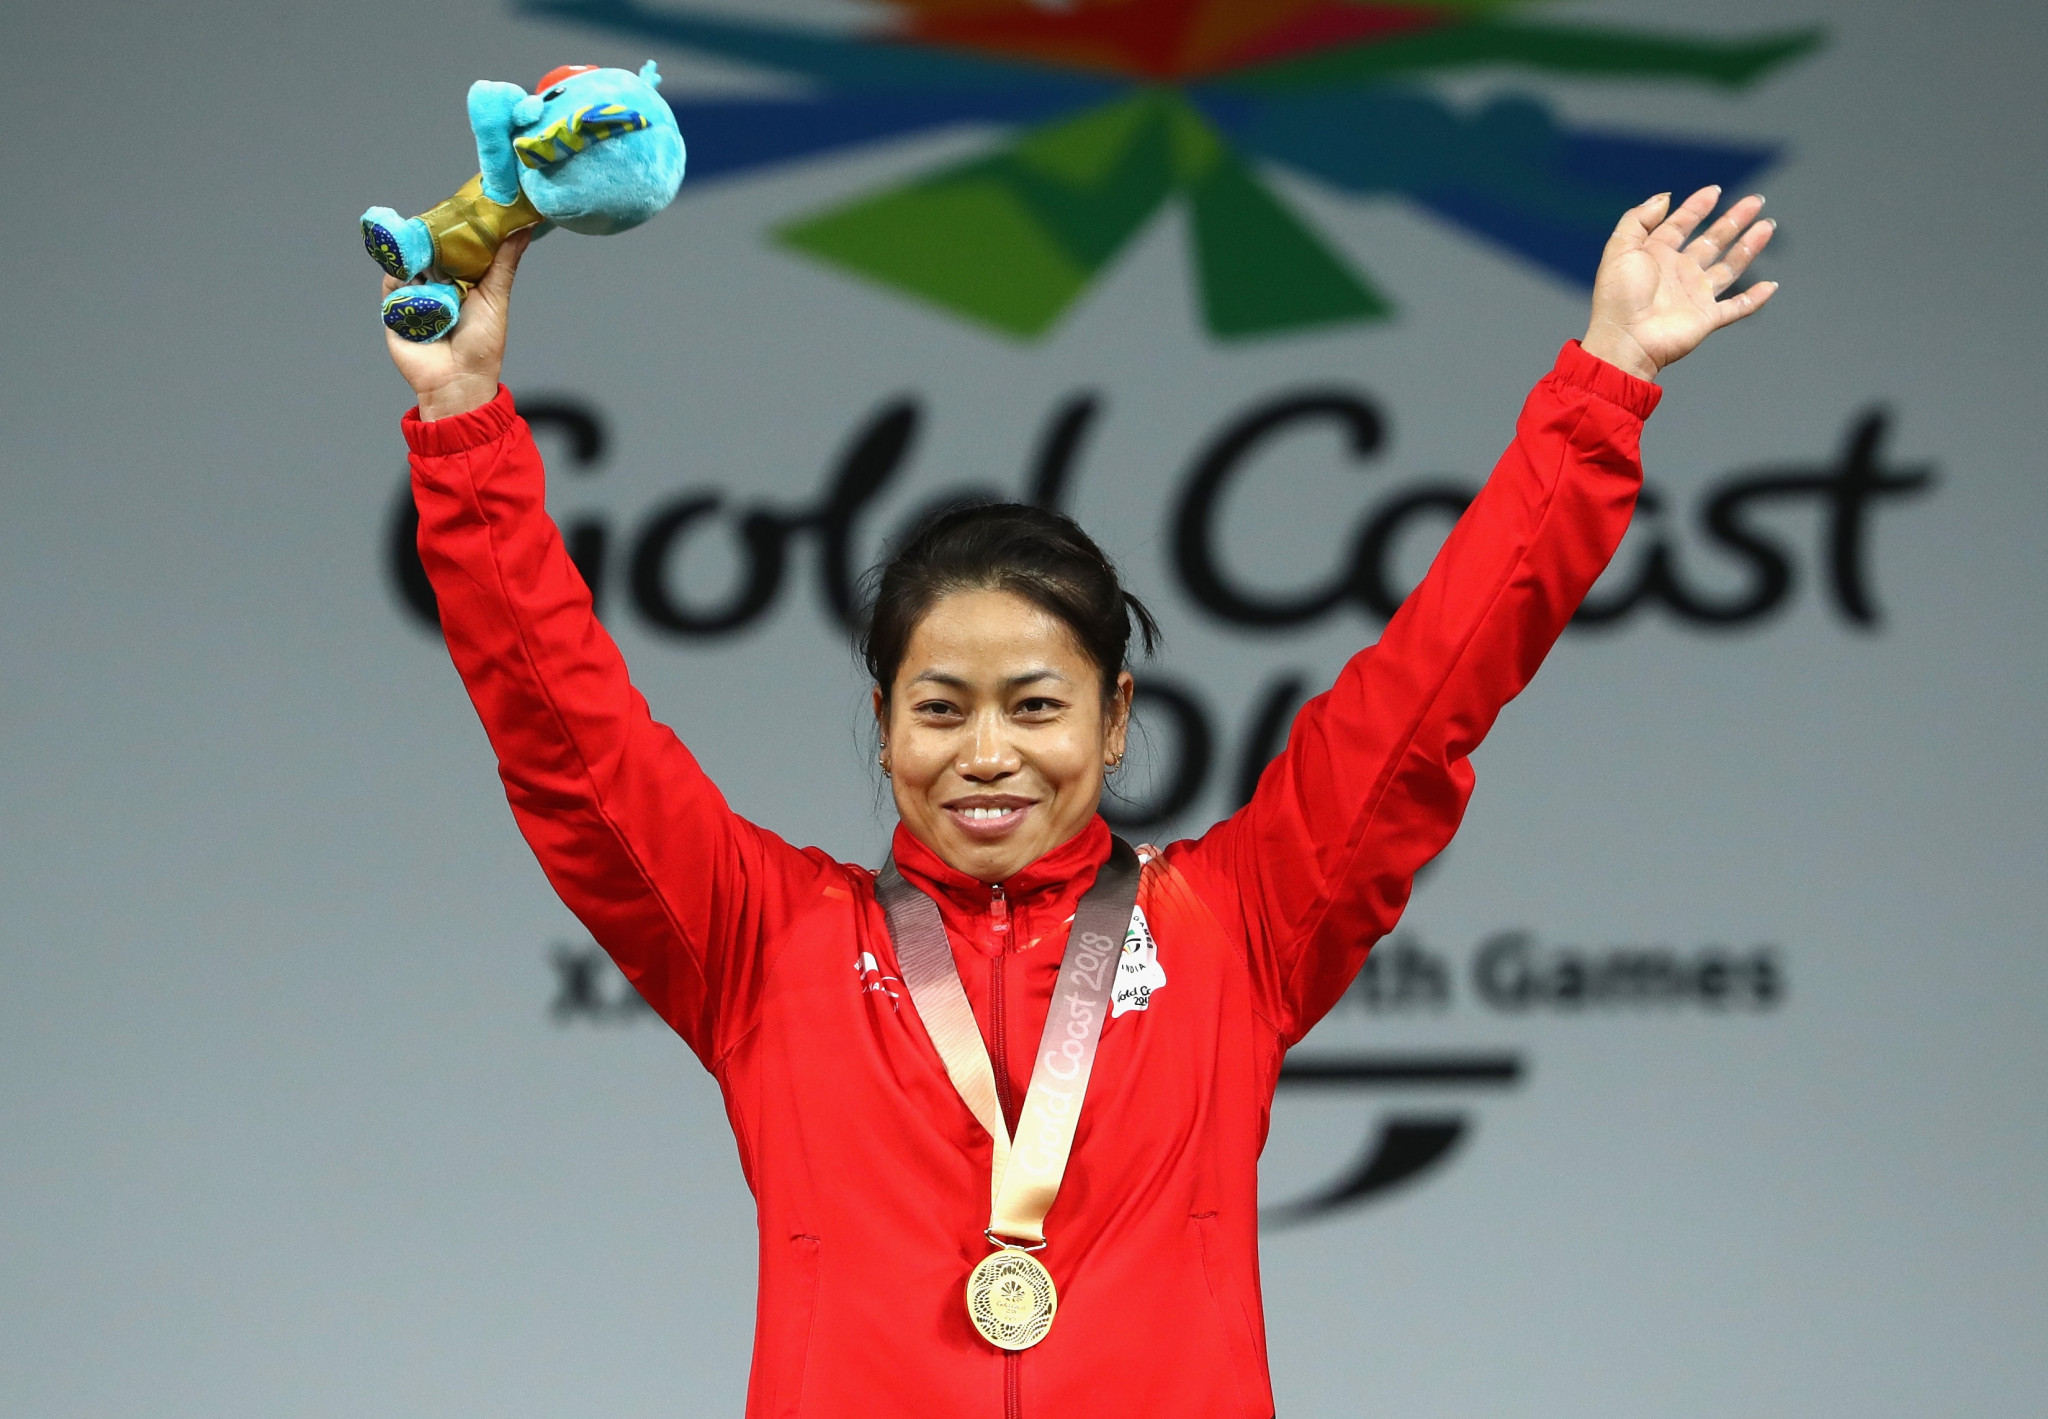 Sanjita Chanu Khumukcham claimed India's second weightlifting gold medal of Gold Coast 2018 after winning the women’s 53kg event today ©Getty Images